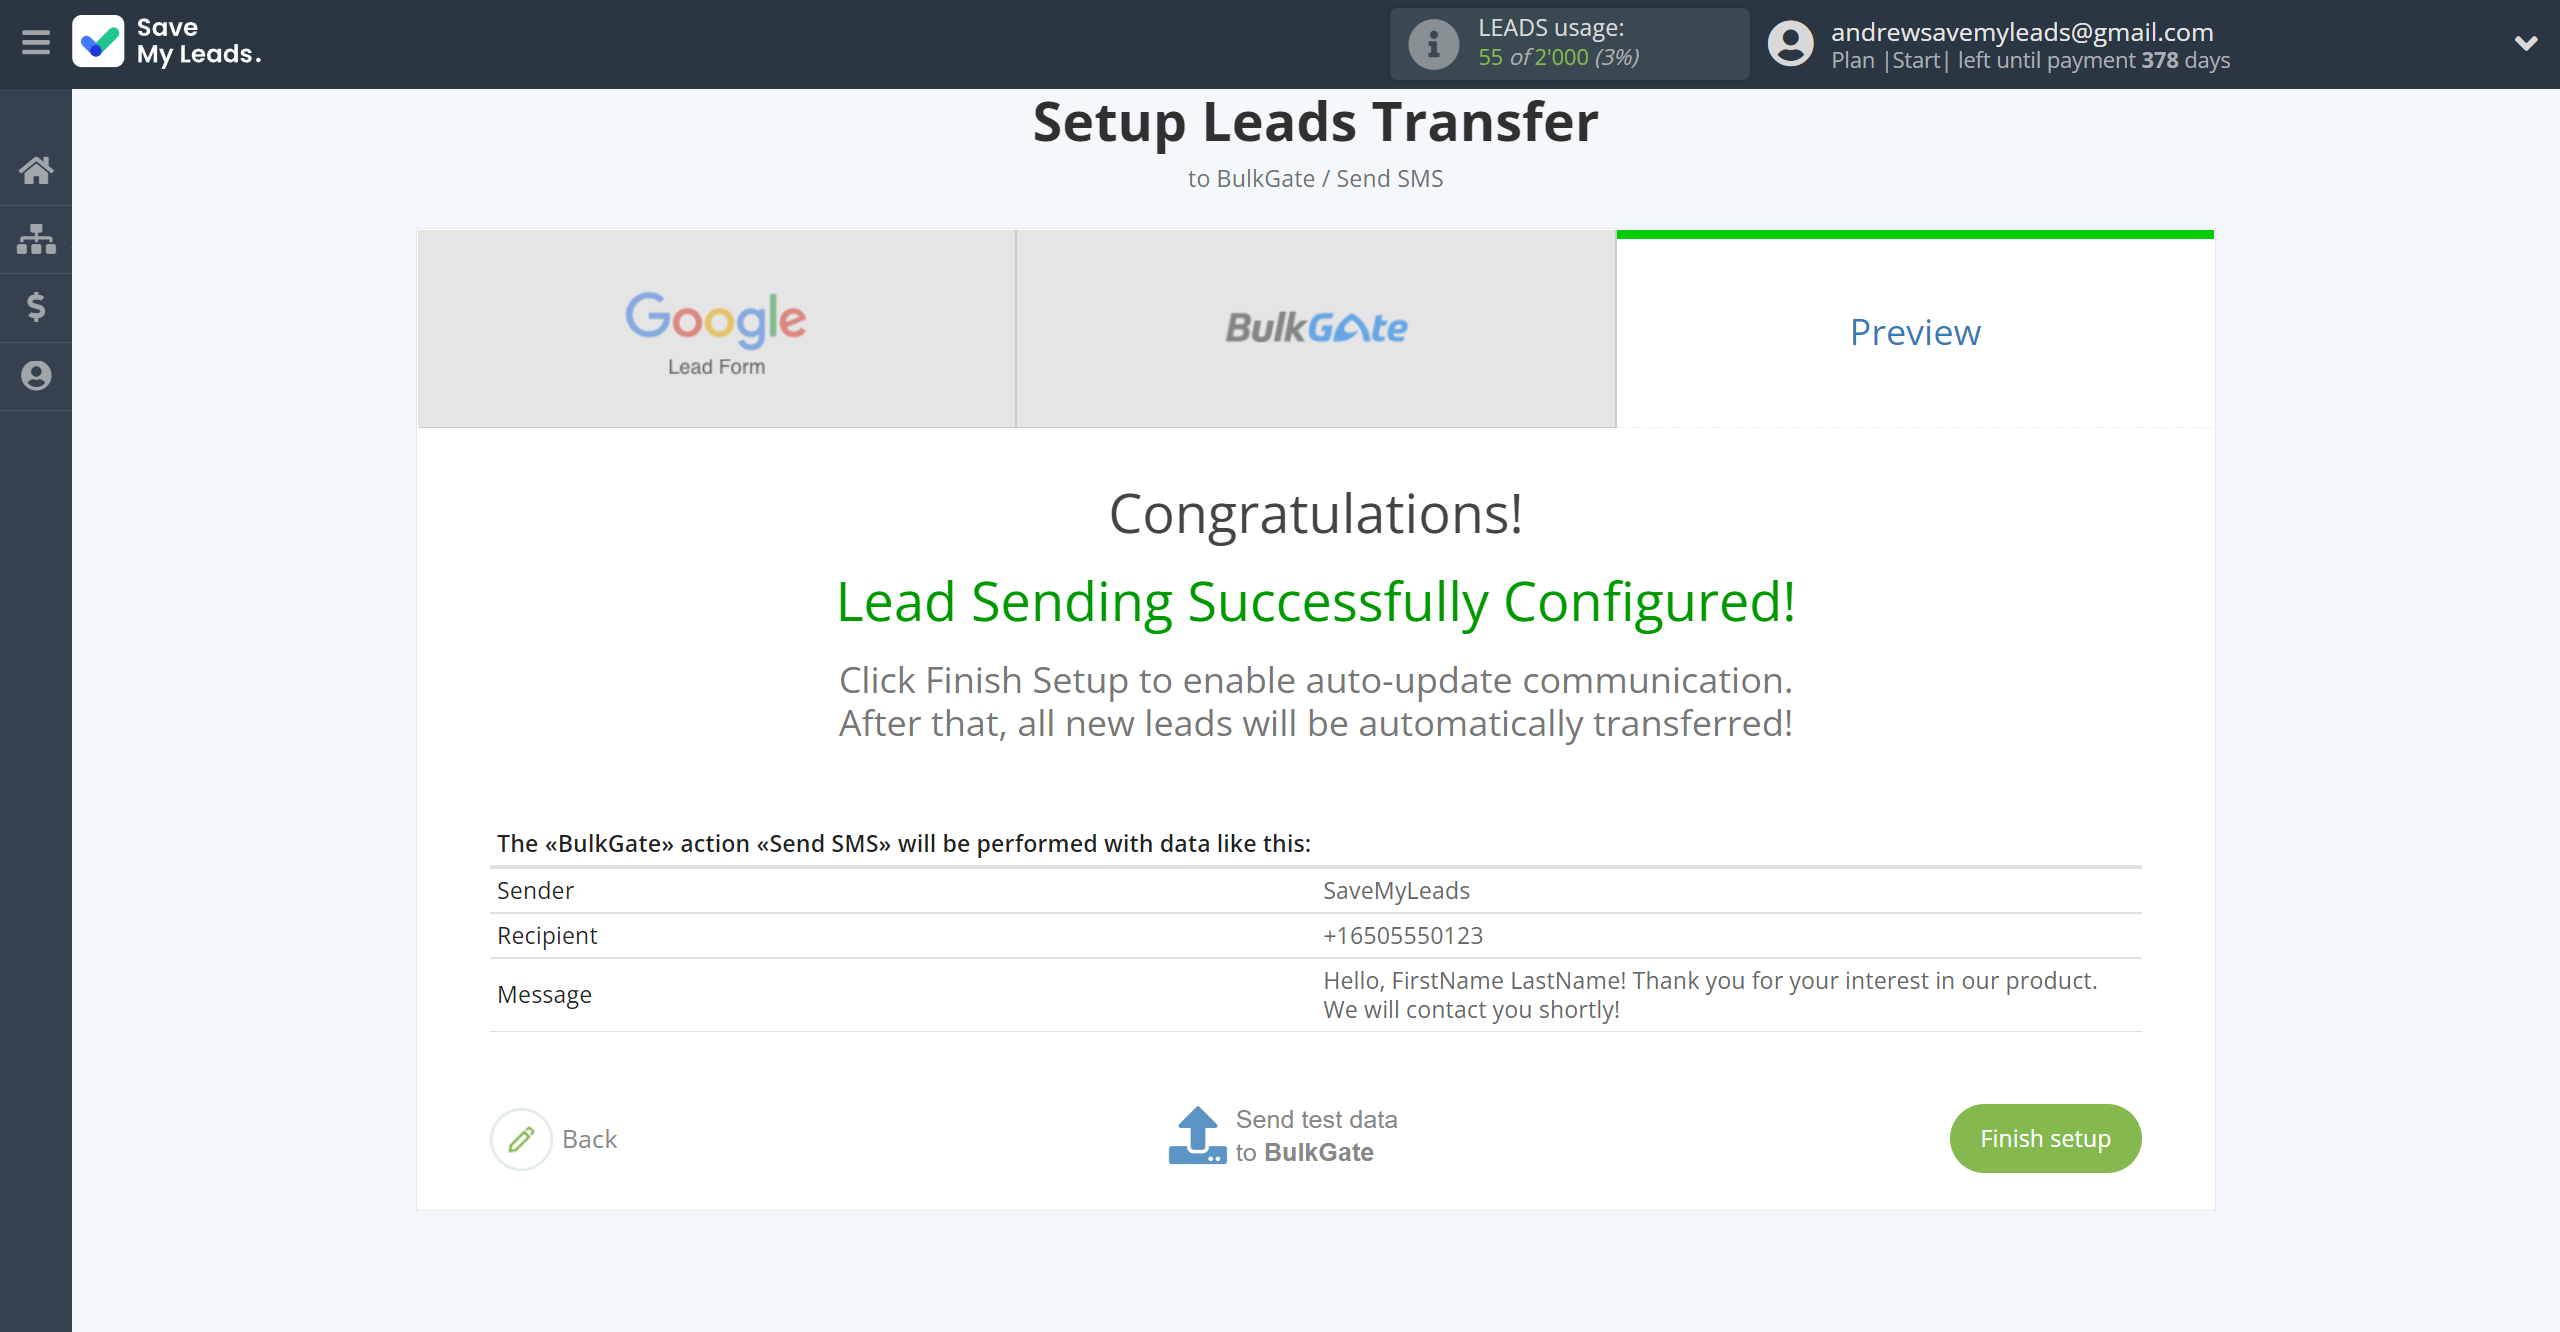 How to Connect Google Lead Form with BulkGate | Test data